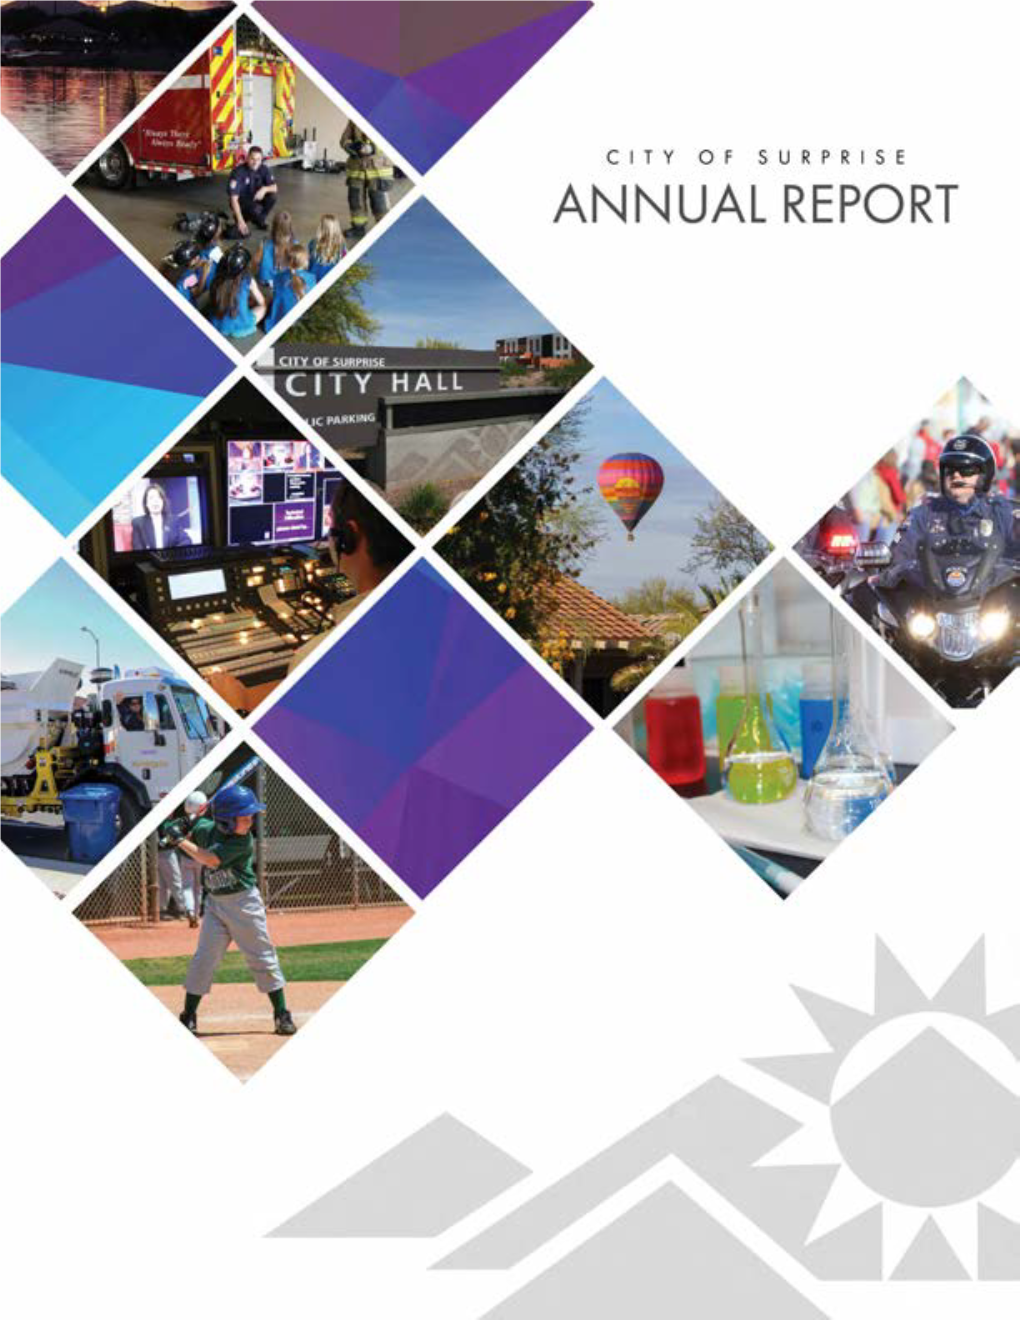 City of Surprise Annual Report 2019